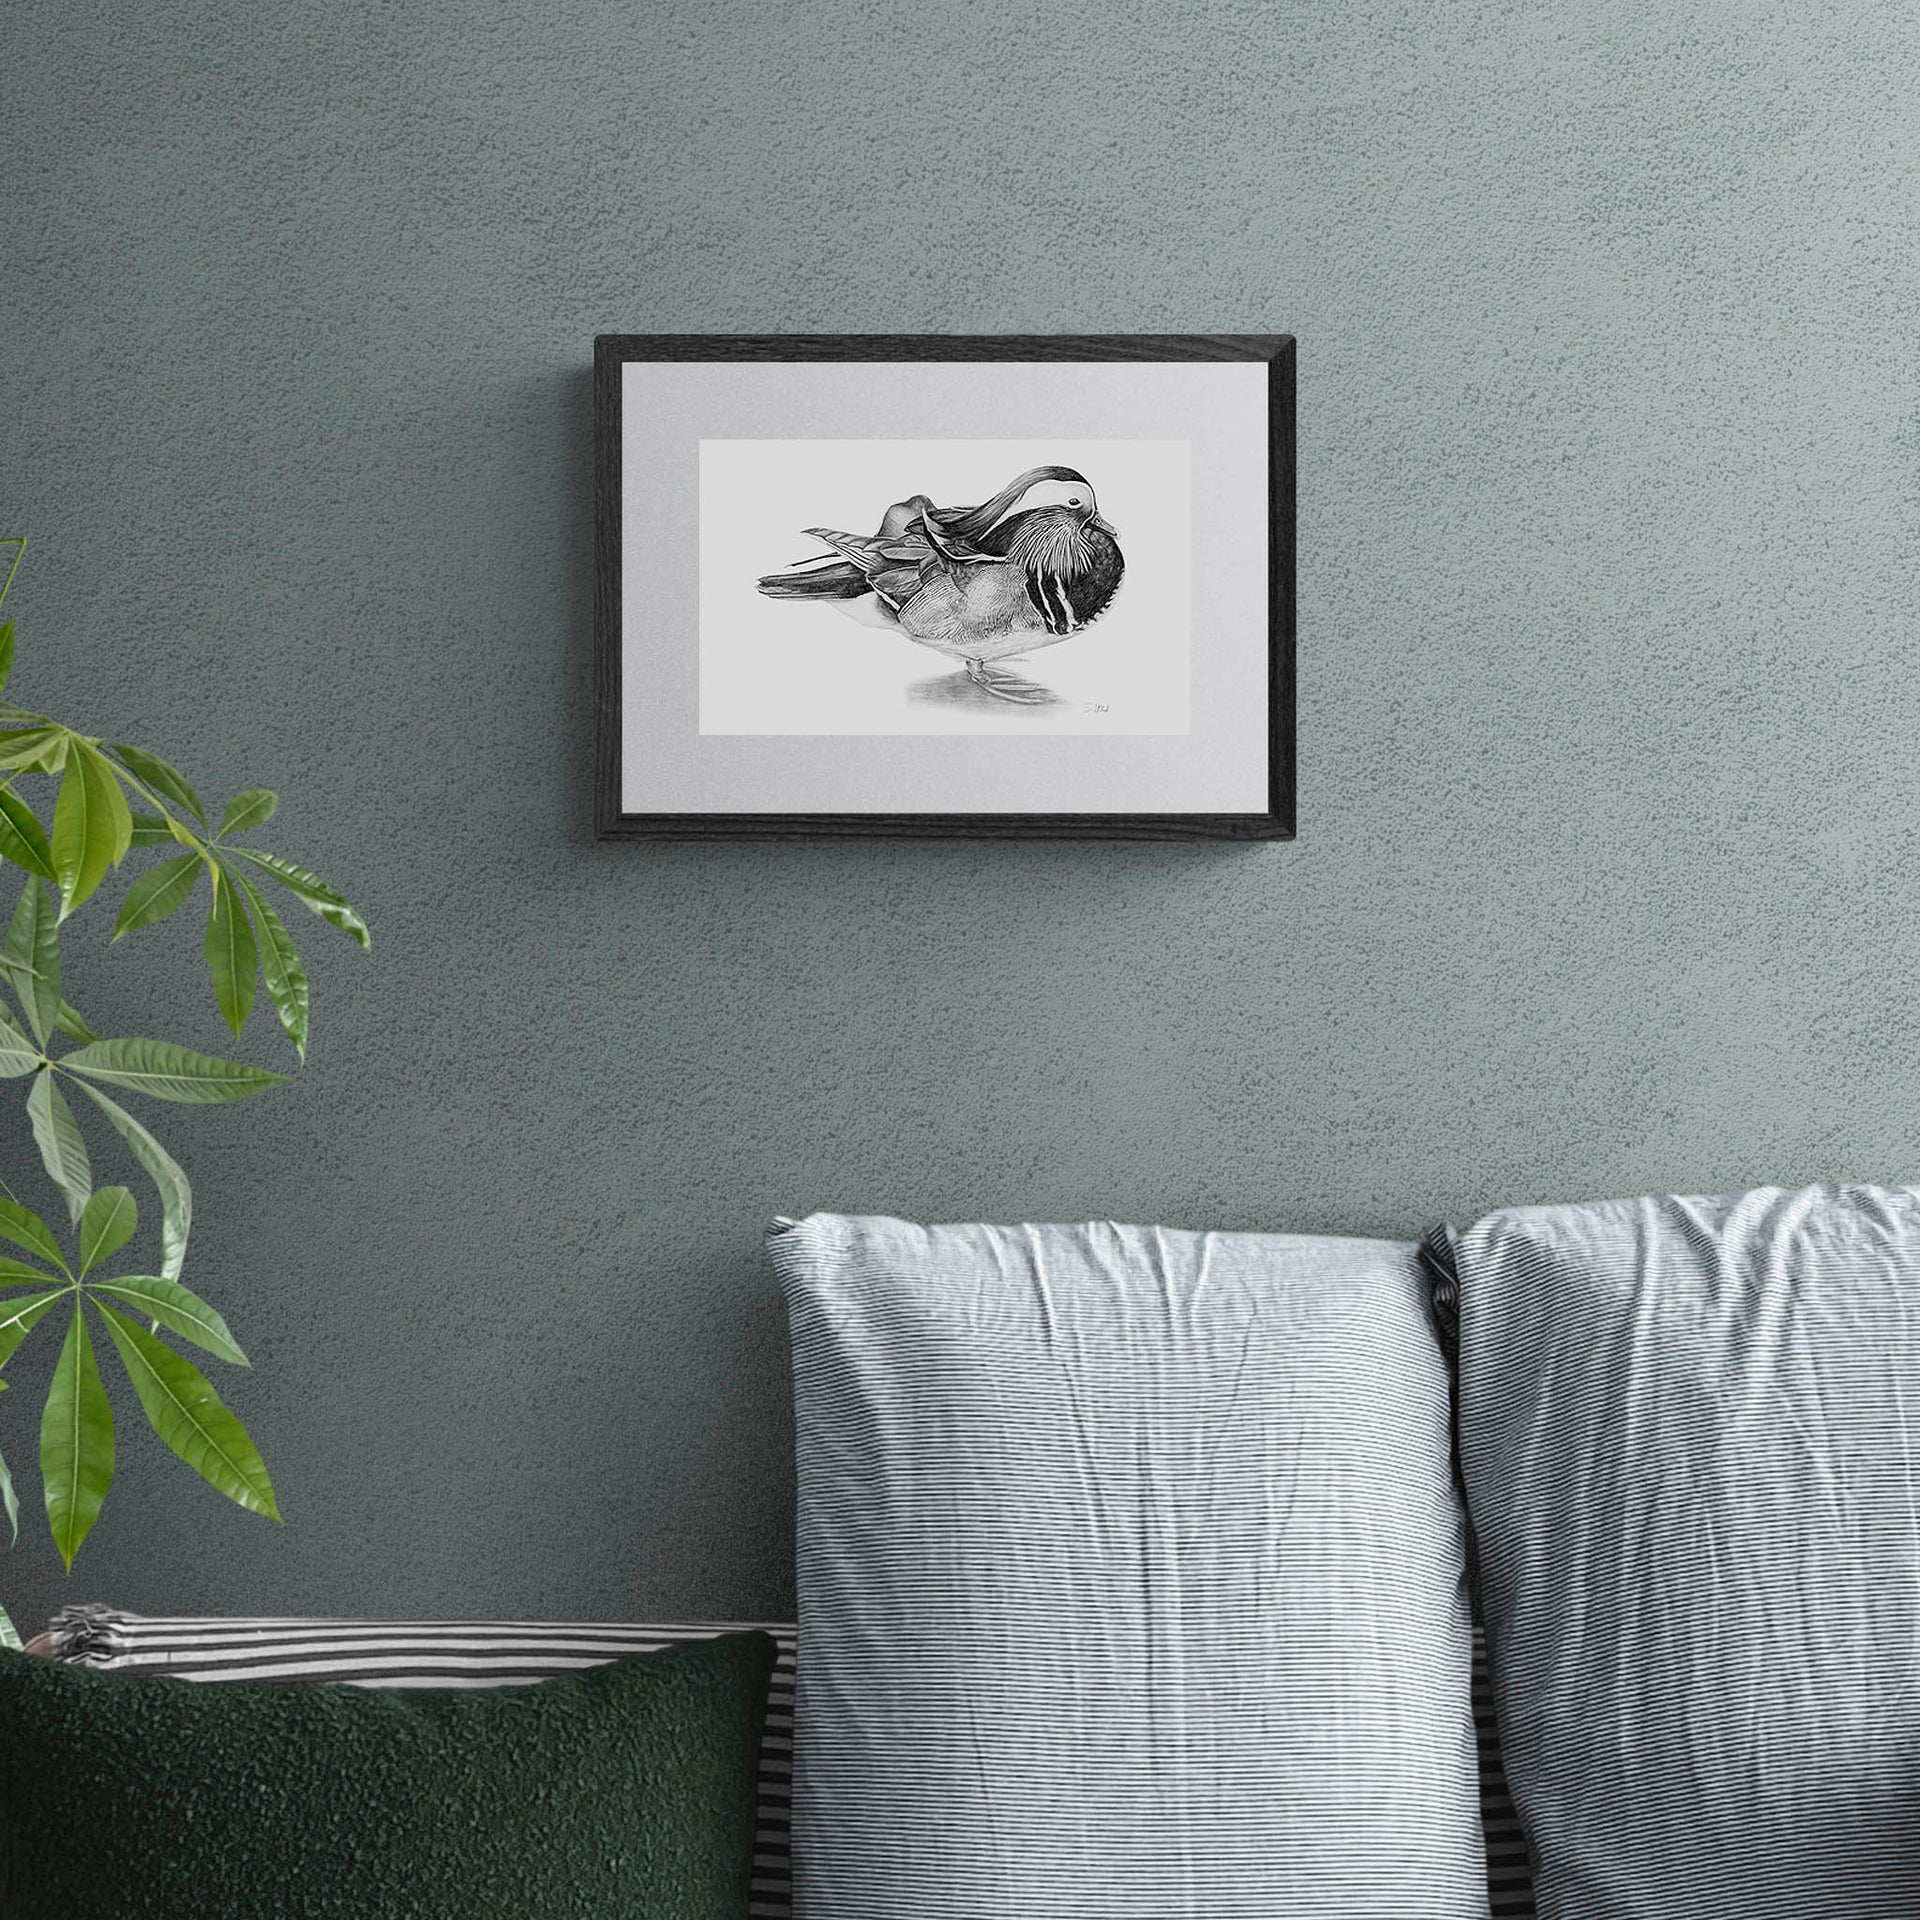 Mandarin duck pencil drawing print in black frame on the wall